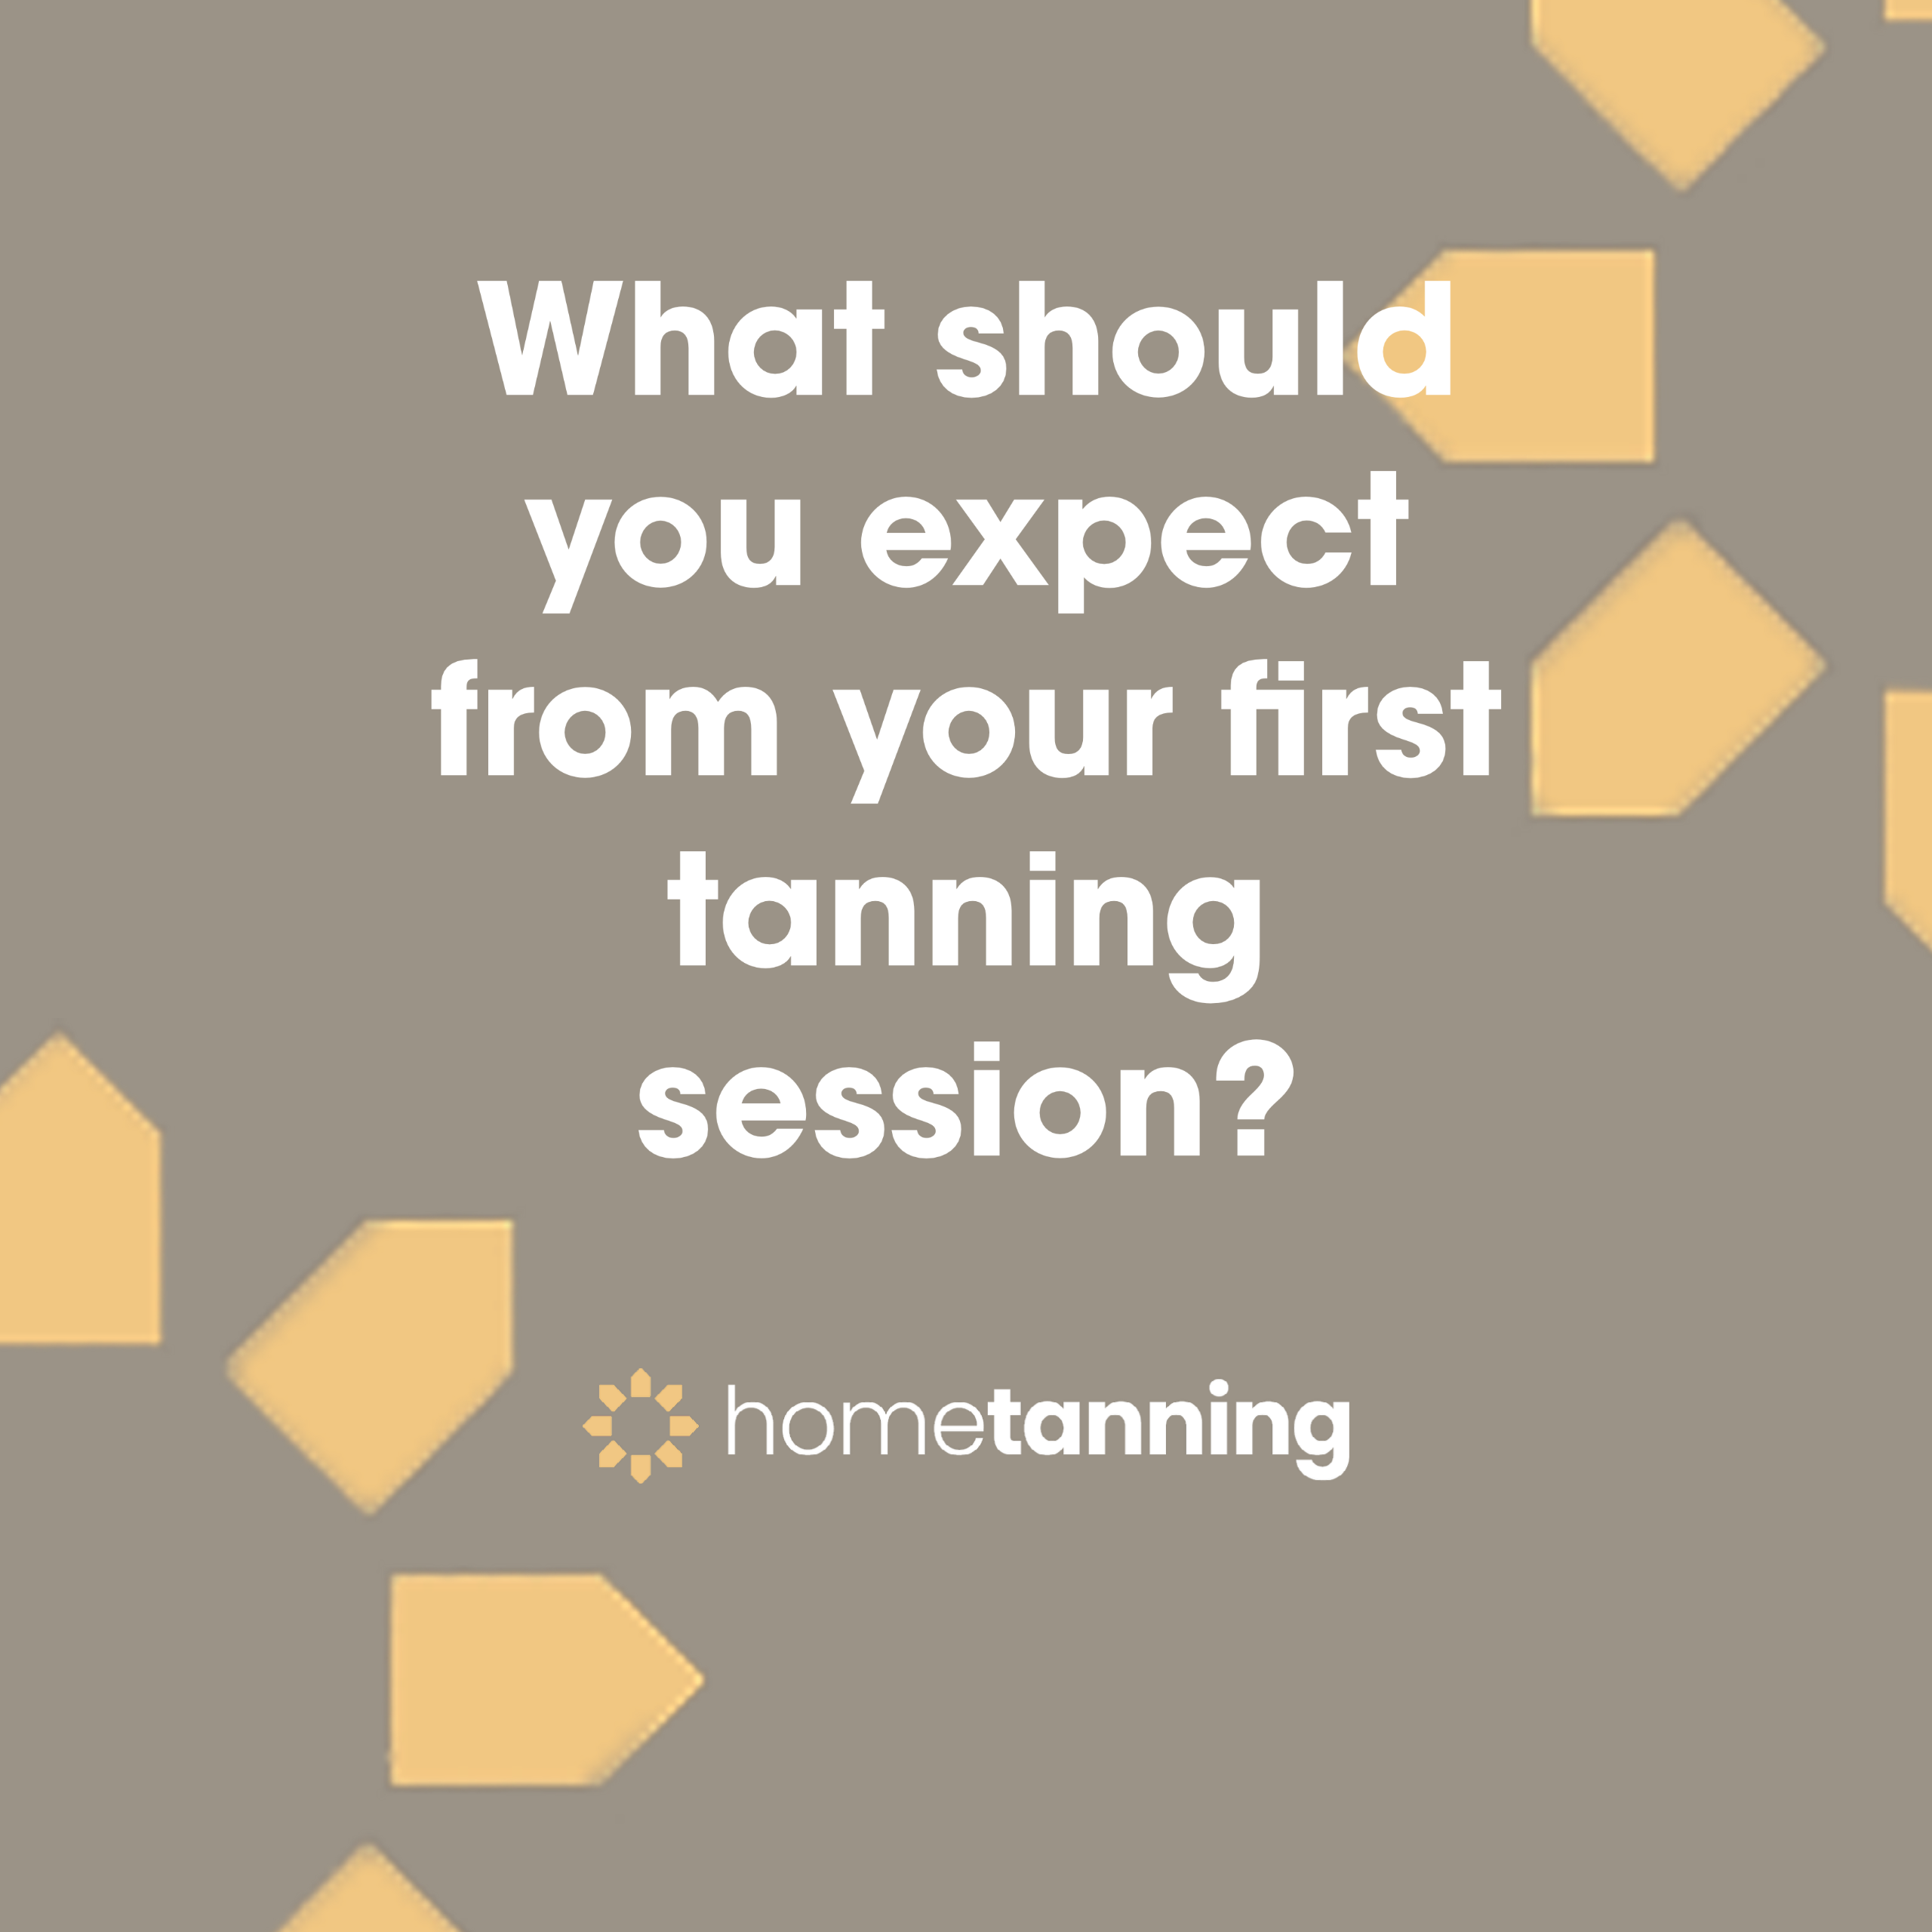 what should you expect from your first tanning session